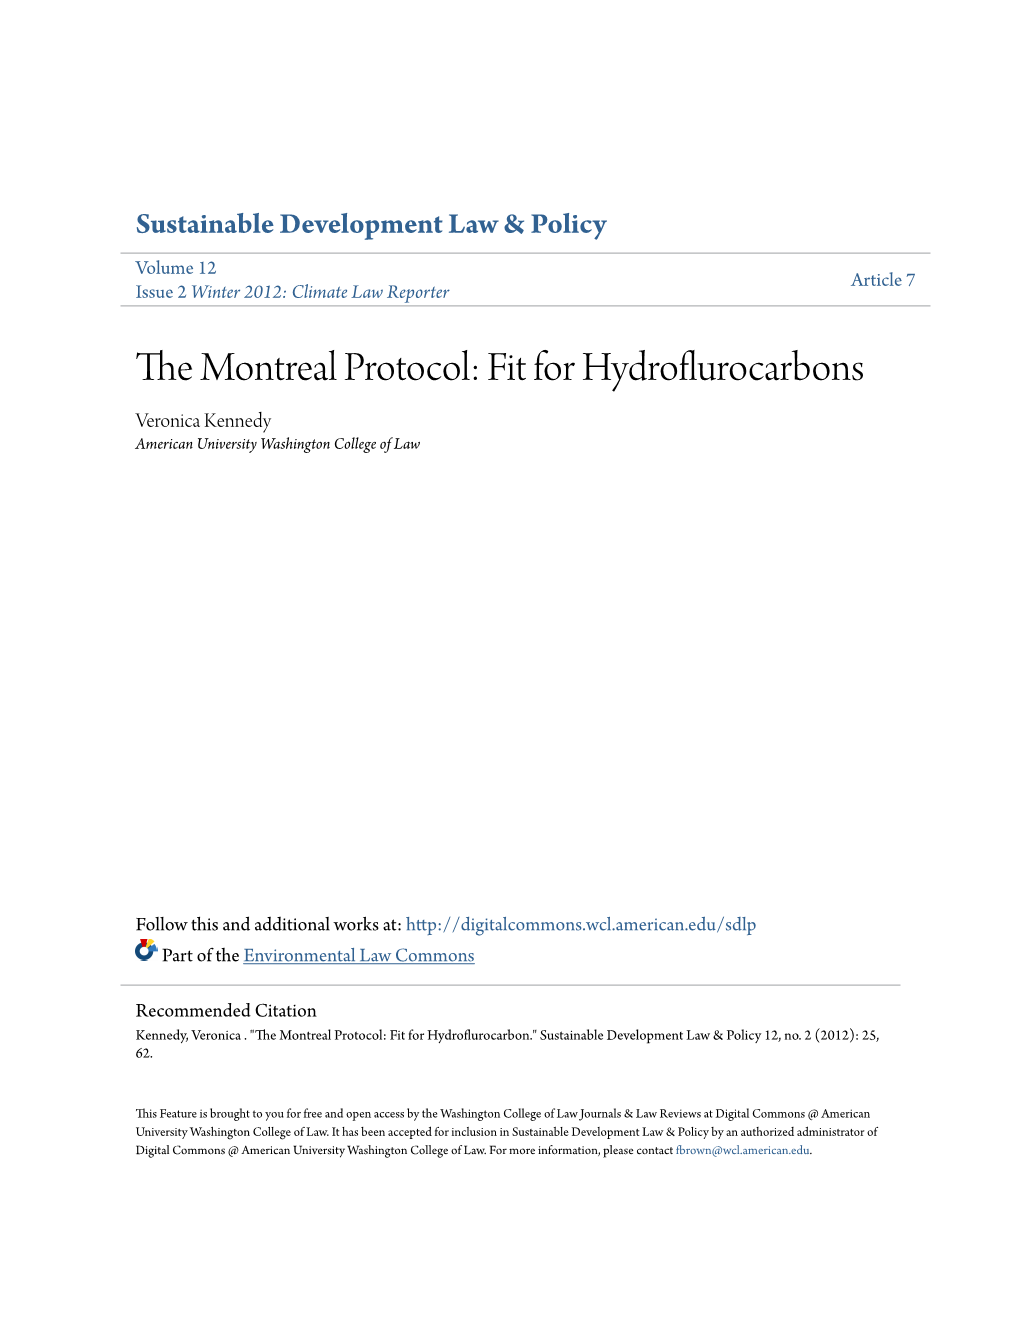 The Montreal Protocol: Fit for Hydroflurocarbons by Veronica Kennedy*